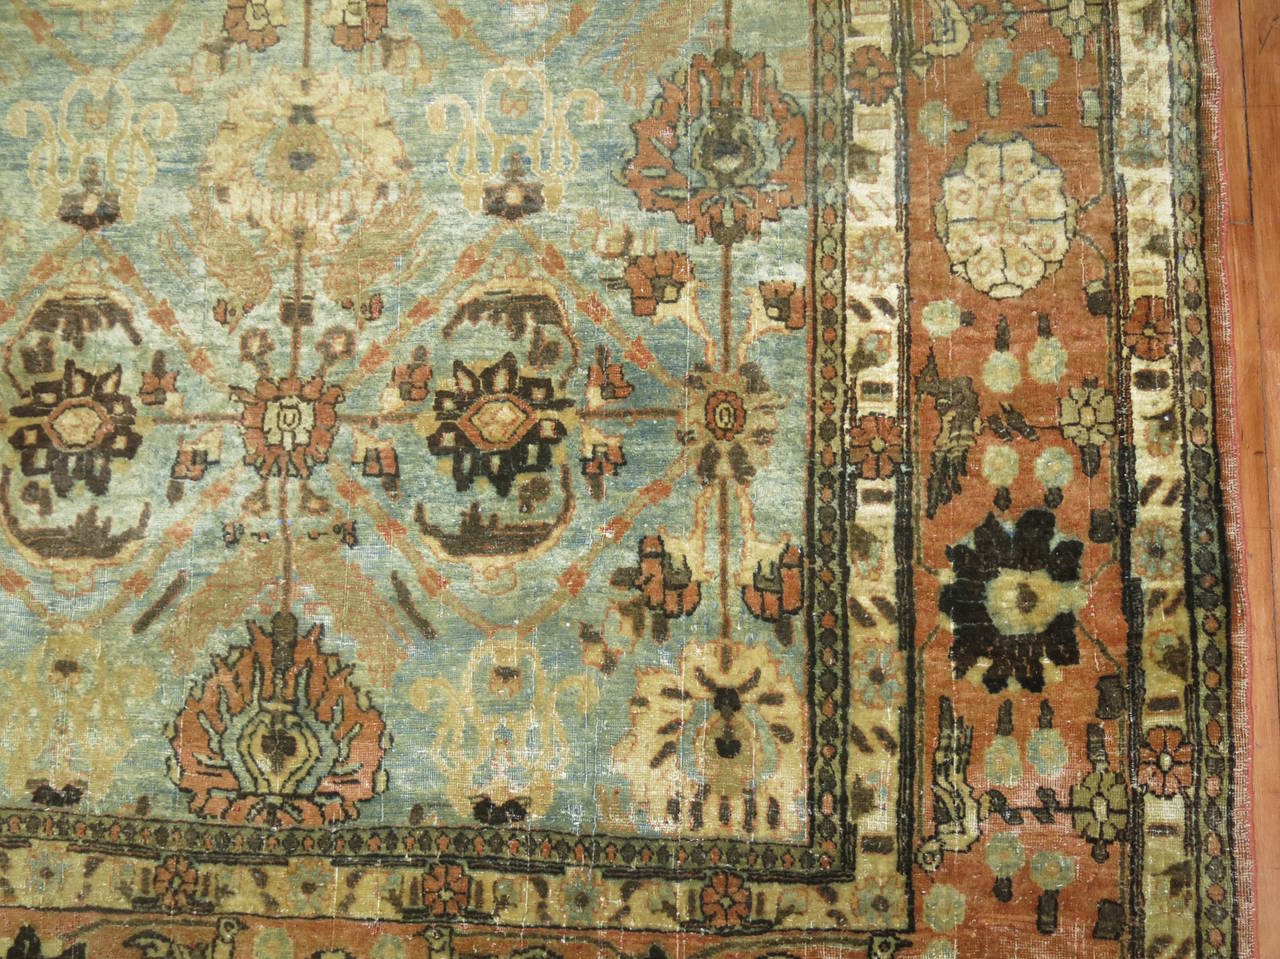 Veramin(Varamin) rugs are woven in city of Varamin and its surrounding area which are among most famous carpets in the world. They are a rare breed when it comes to antique persian rugs. Many rug and carpet experts see Varamins as purer Persian